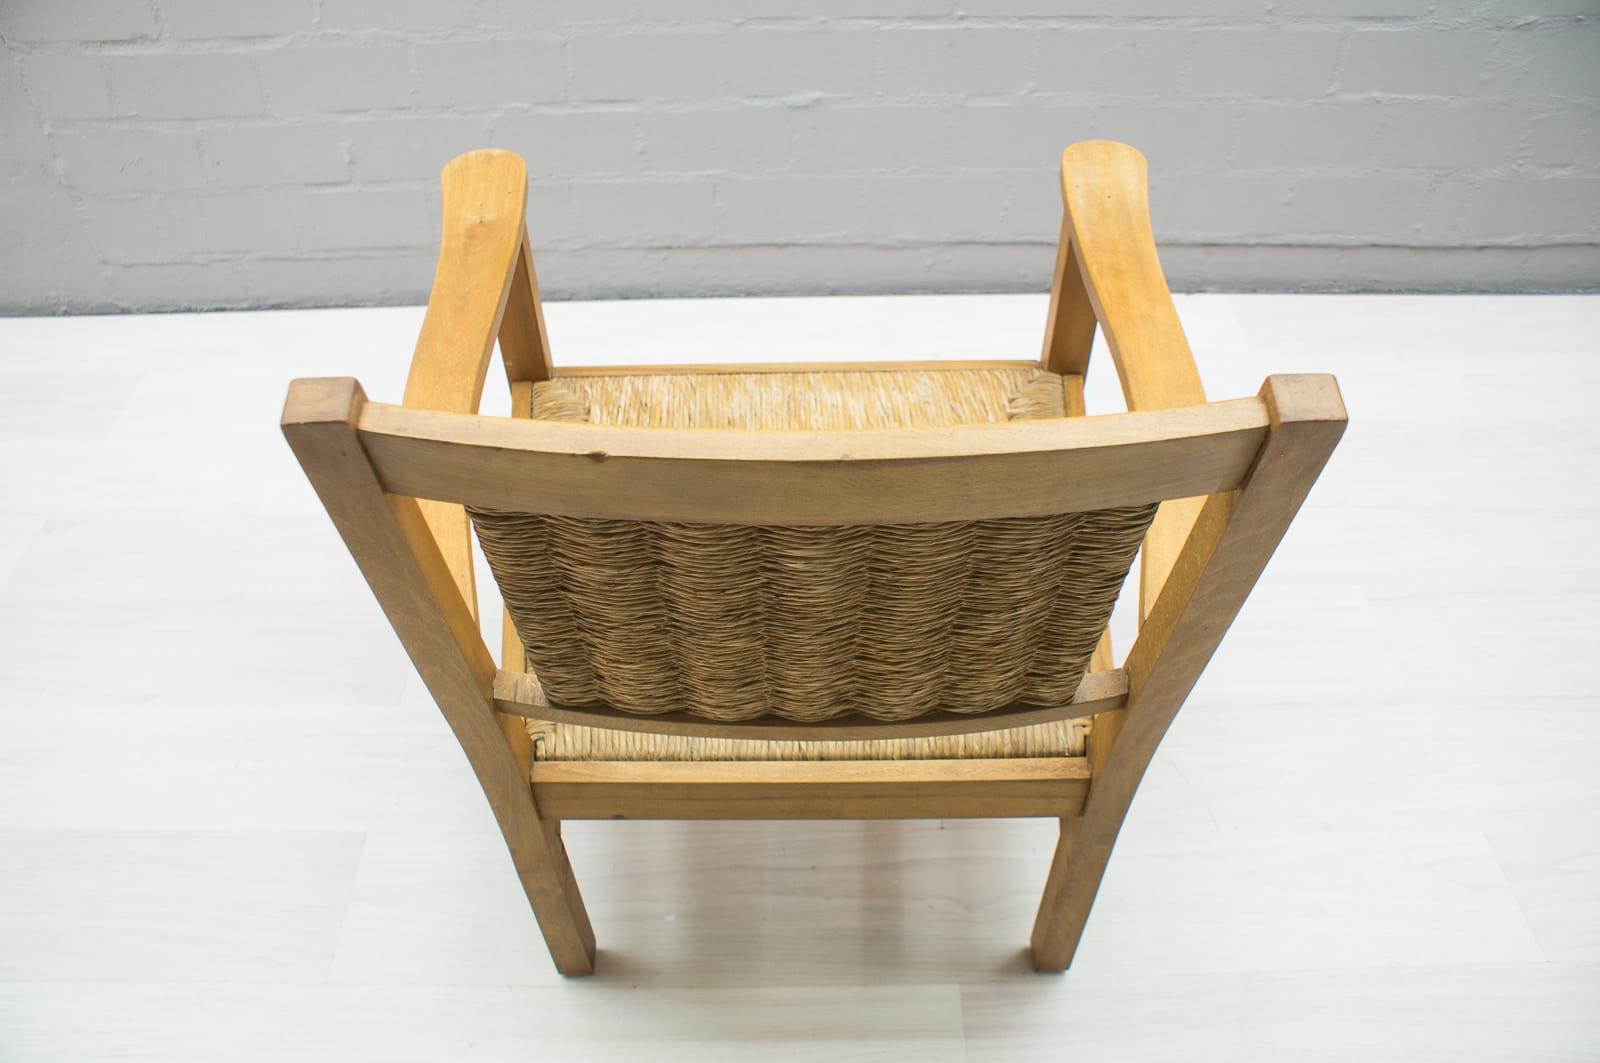 Mid-20th Century French Art Deco Modernist Wicker Armchair Attributed to Francis Jourdain, 1940s